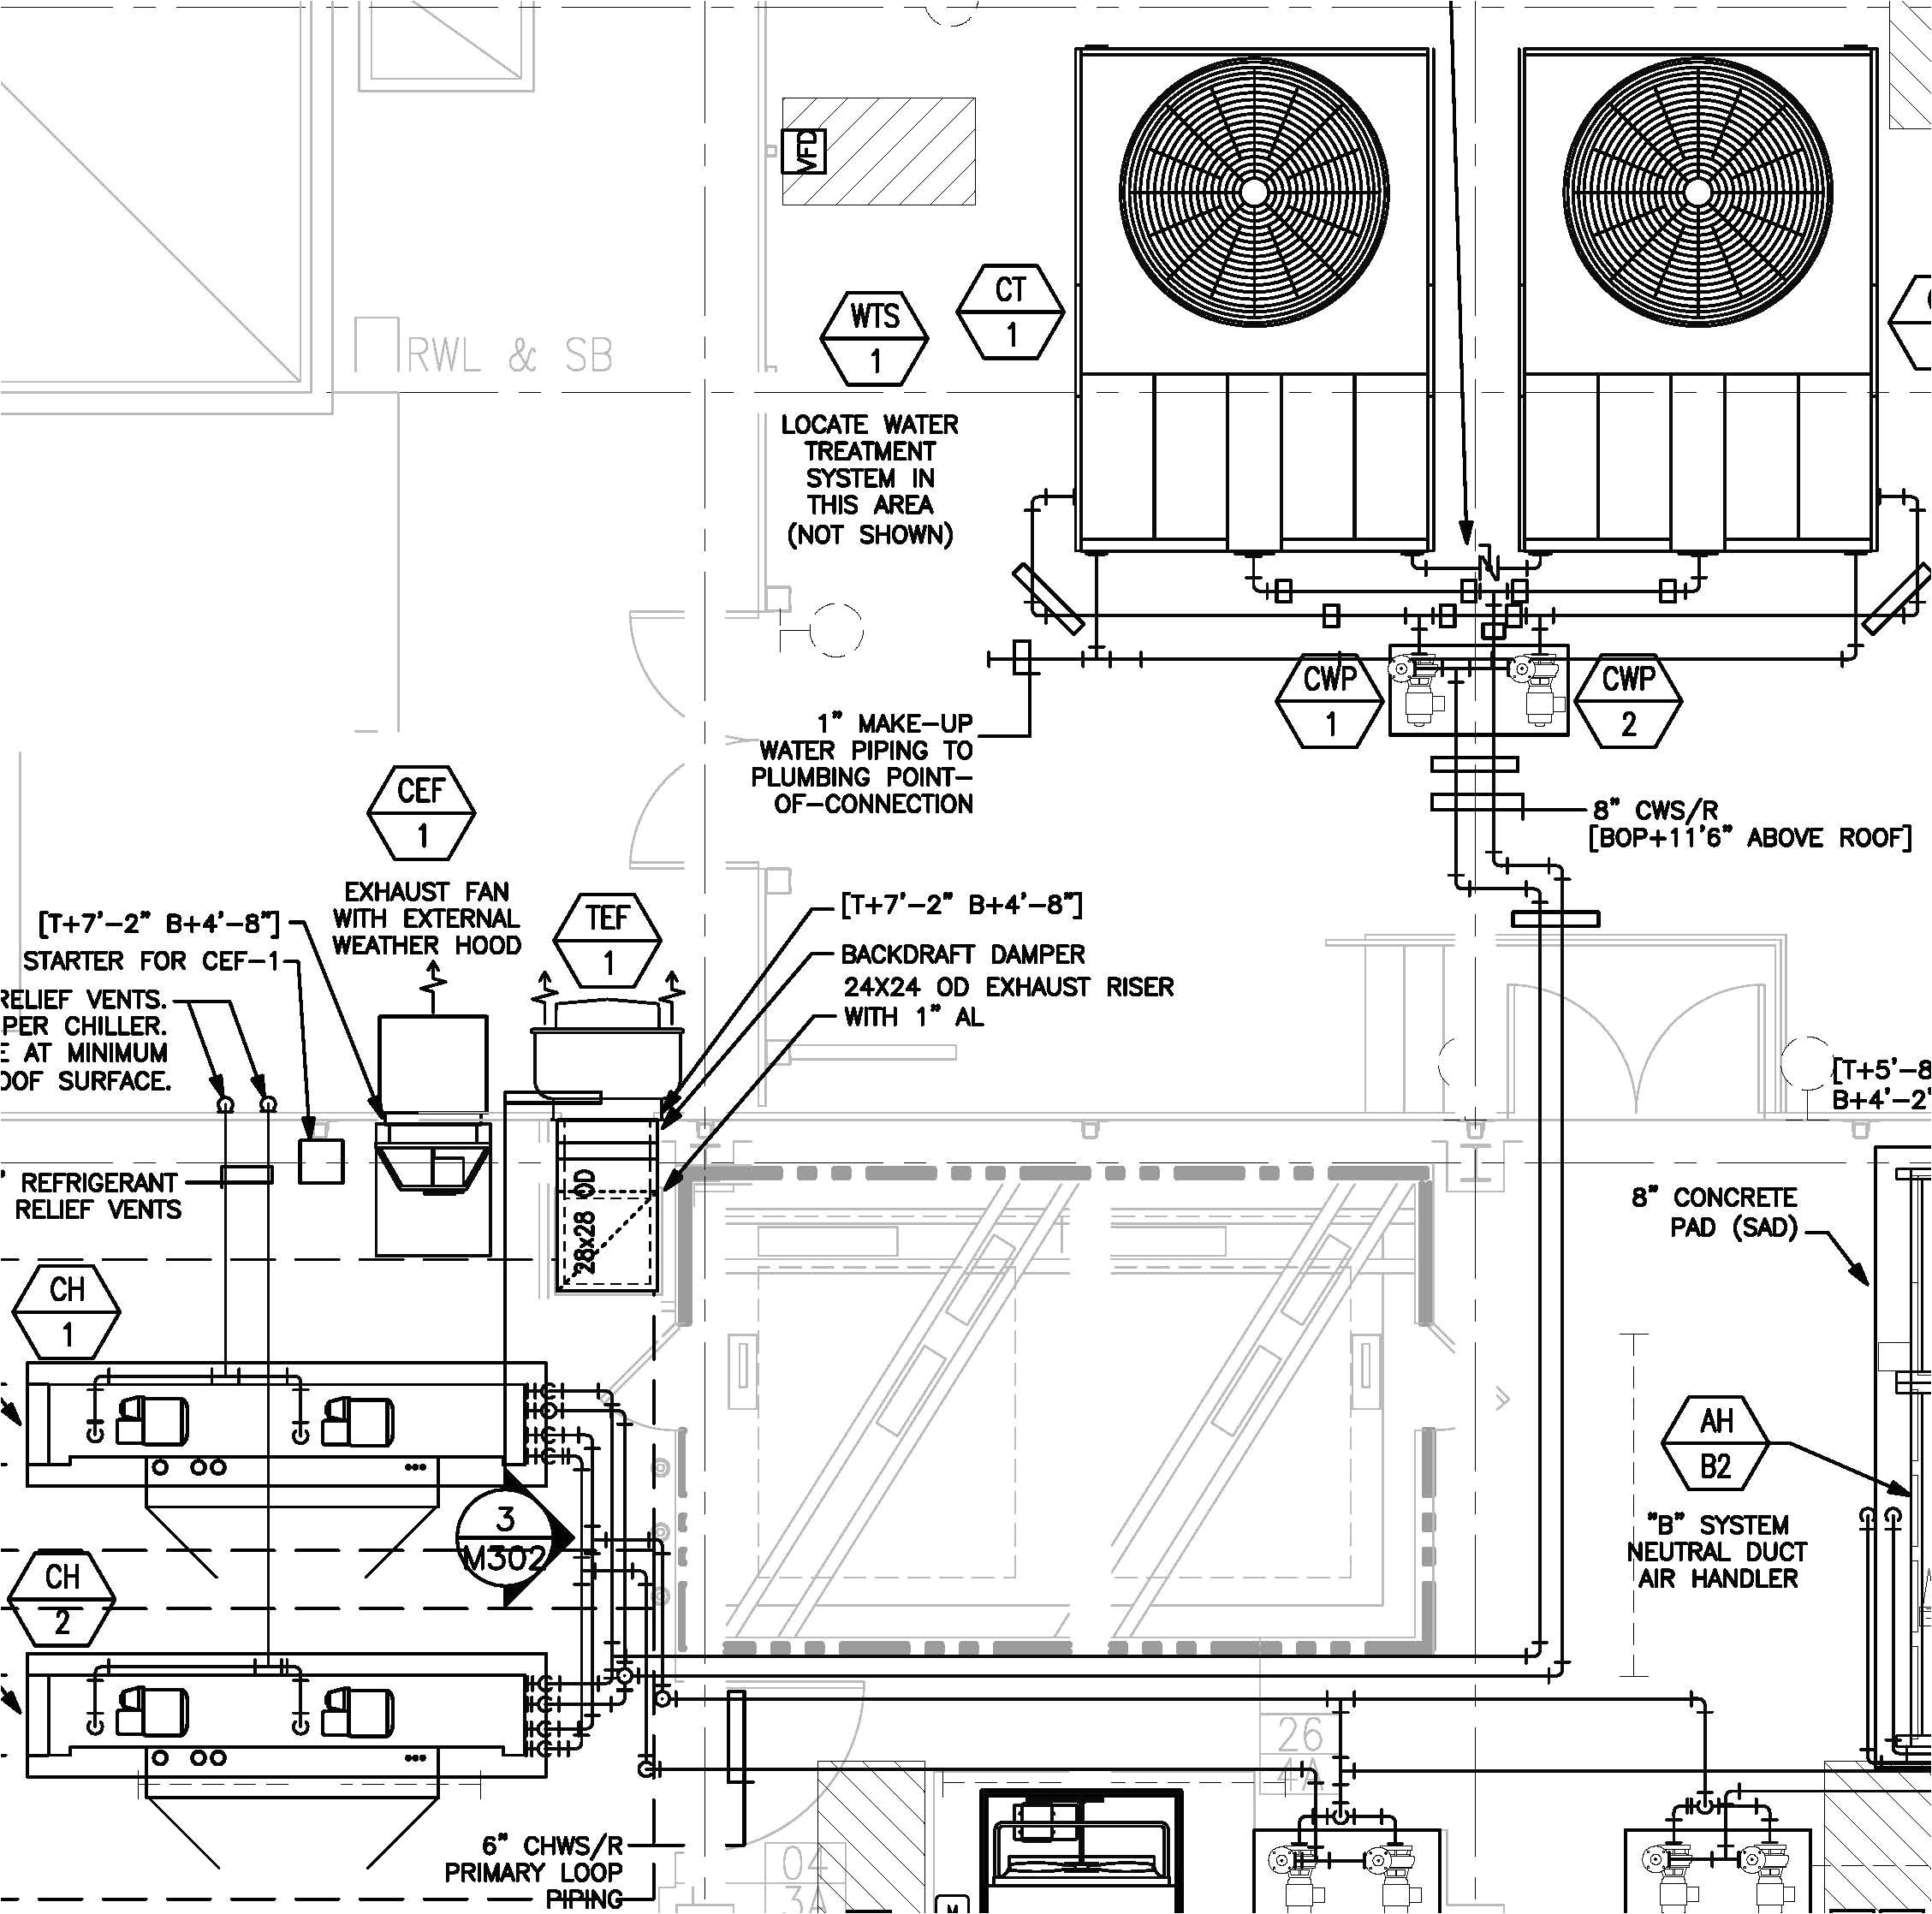 chillers sentry wiring diagram wiring diagrams posts chillers sentry wiring diagram